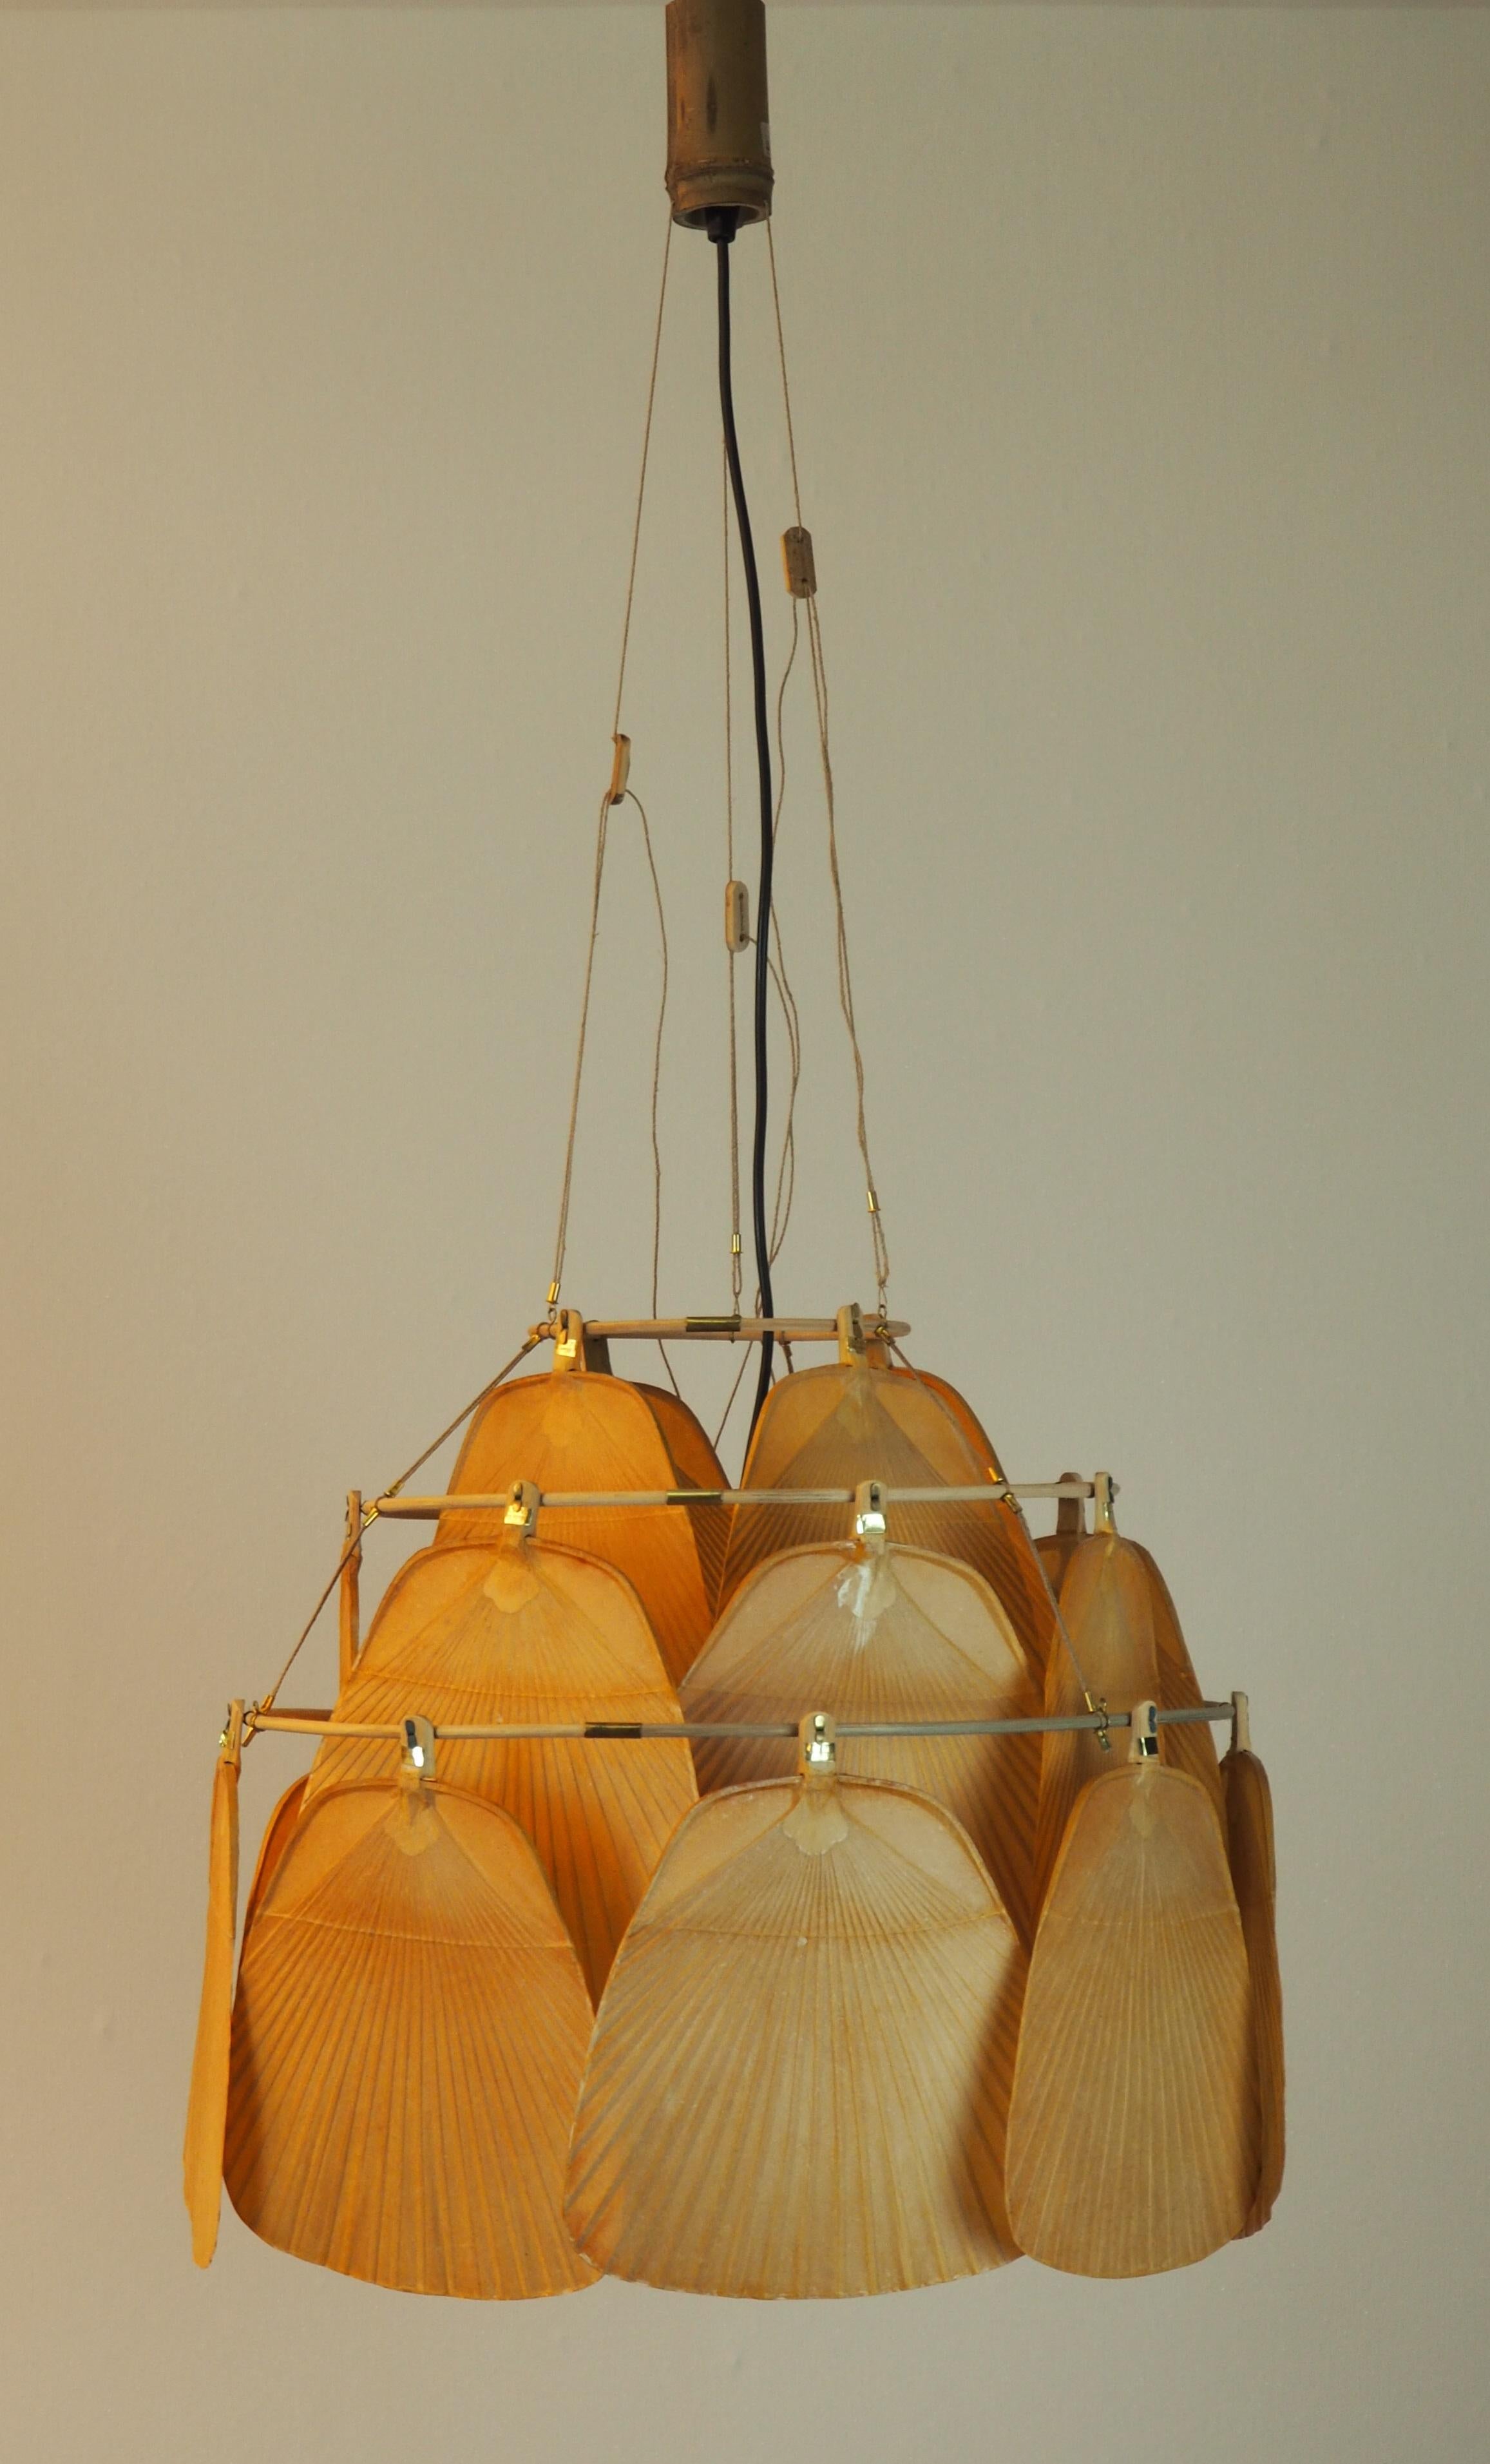 Exceptional Uchiwa bamboo fan chandelier or pendant lamp by Ingo Maurer for Design M, 1970s, Germany. Executed in bamboo and 19 rice paper fans.
Socket: 1 x E27 Edison for standard screw bulbs.
Height adjustable by suspension from 3 strings.
The